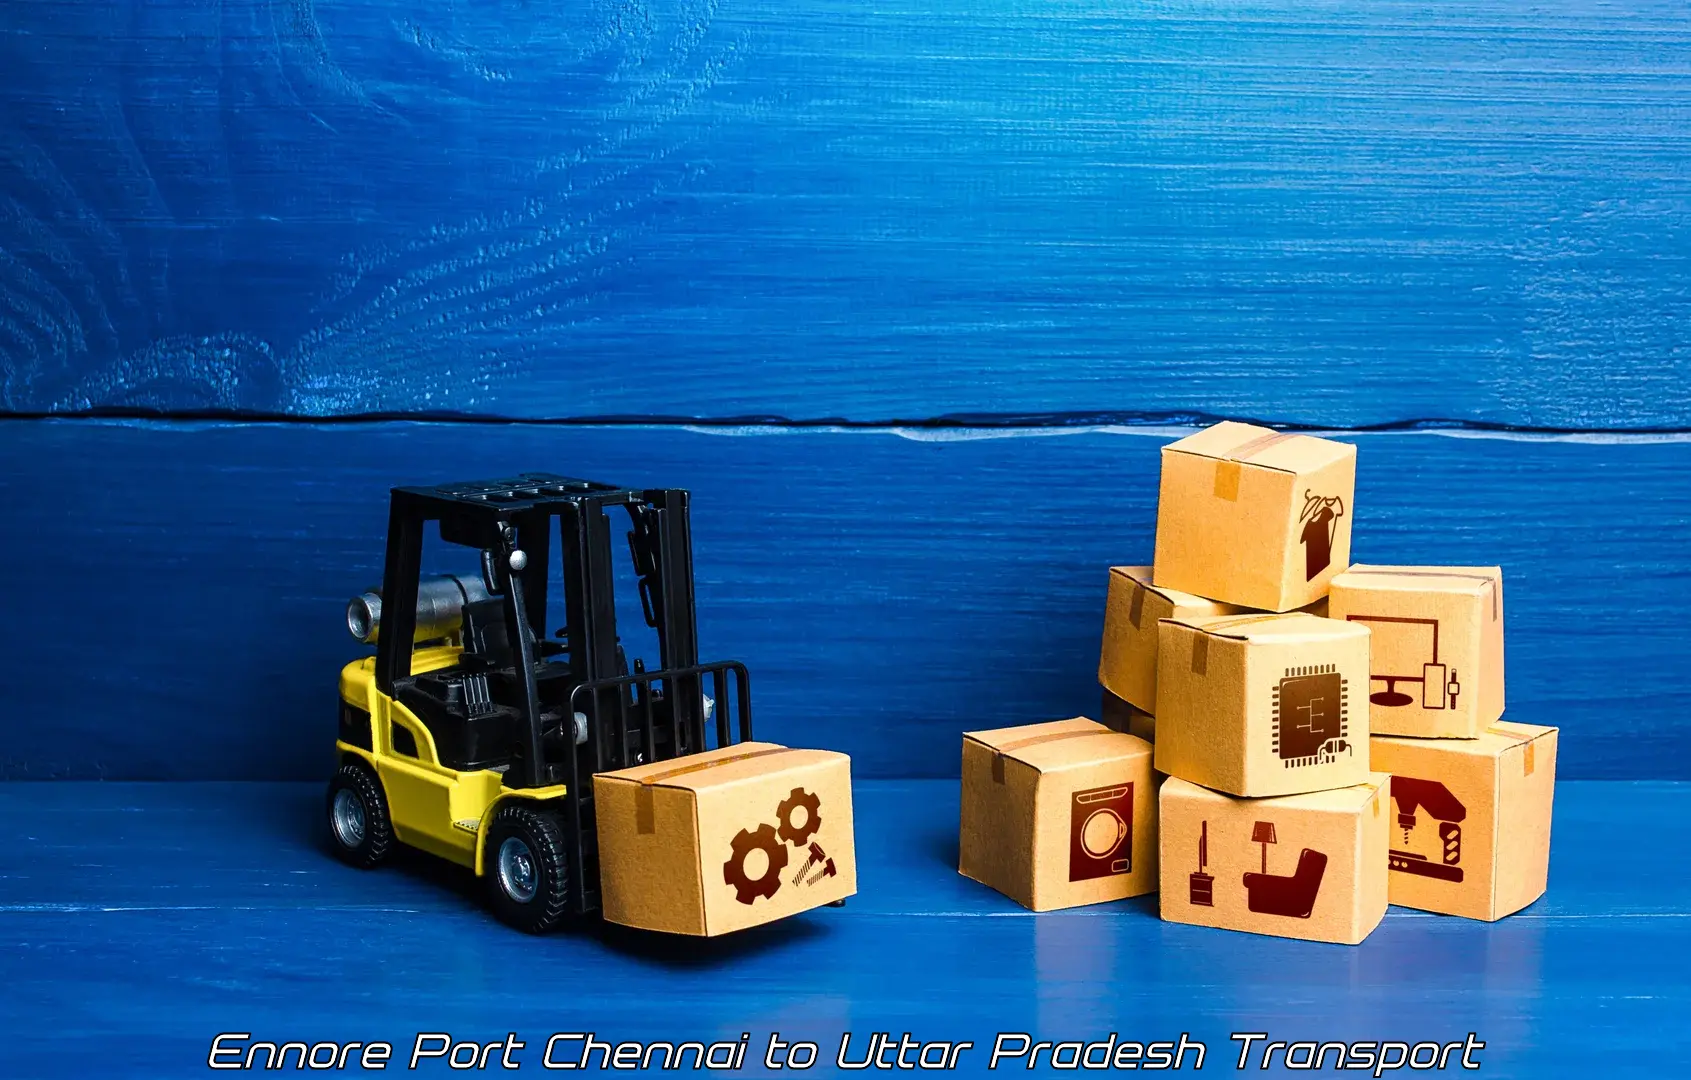 Parcel transport services Ennore Port Chennai to Bhathat